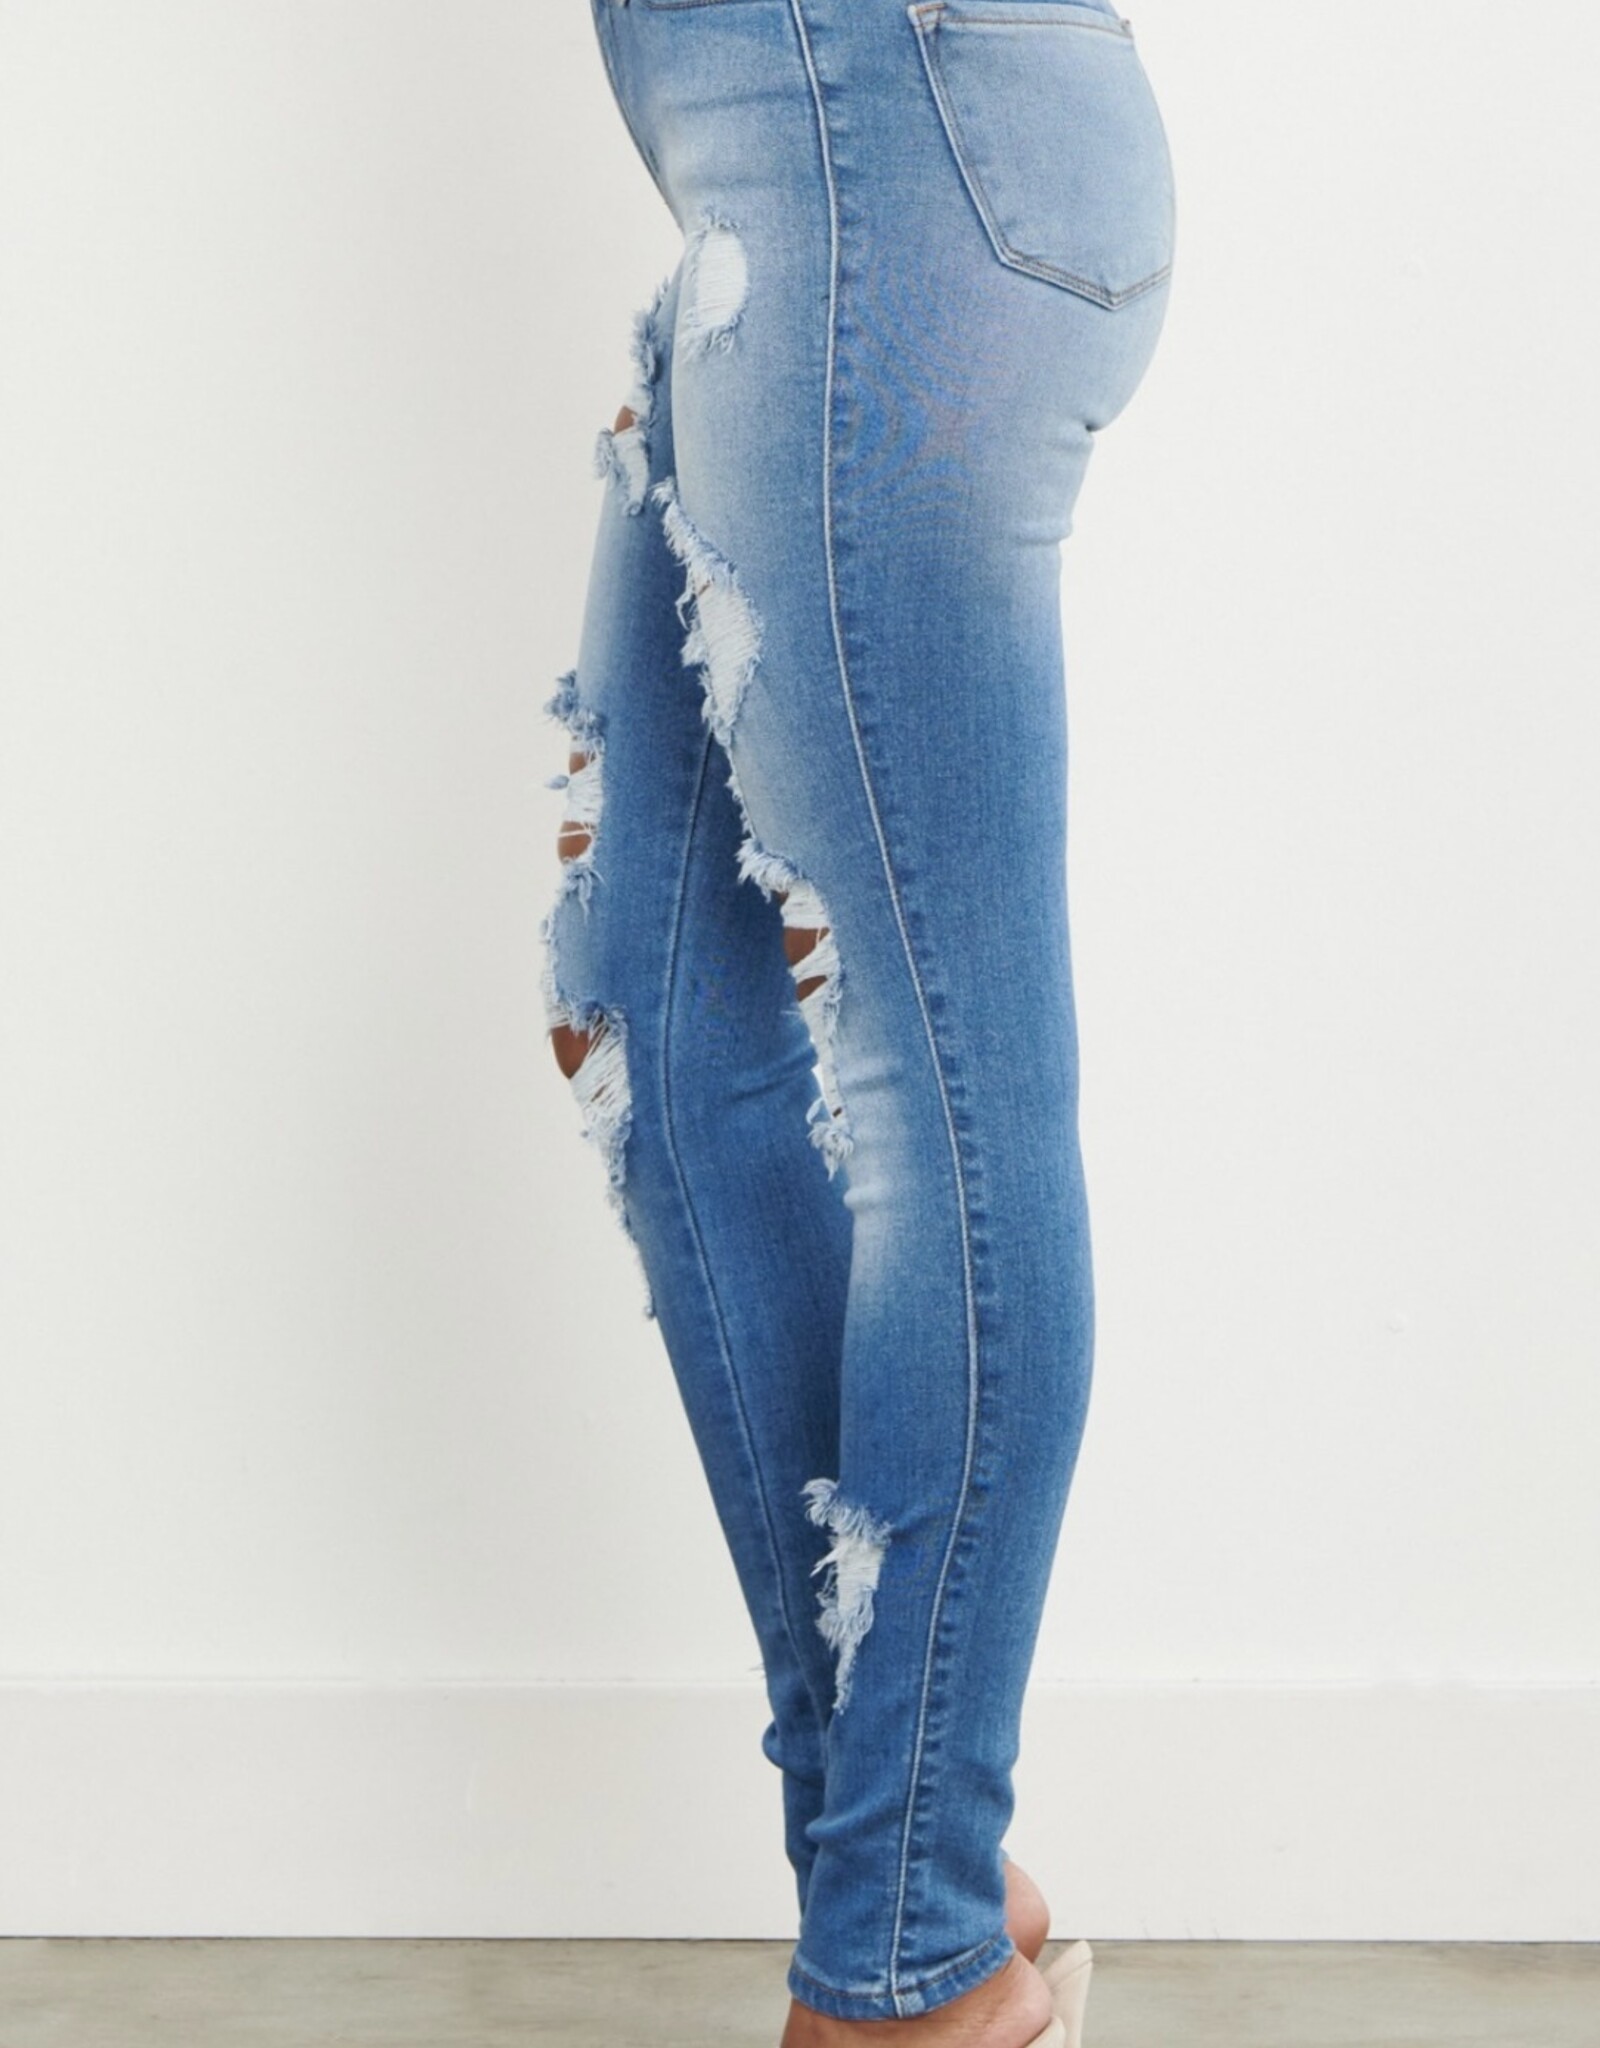 Hight Waisted Distressed Jeans